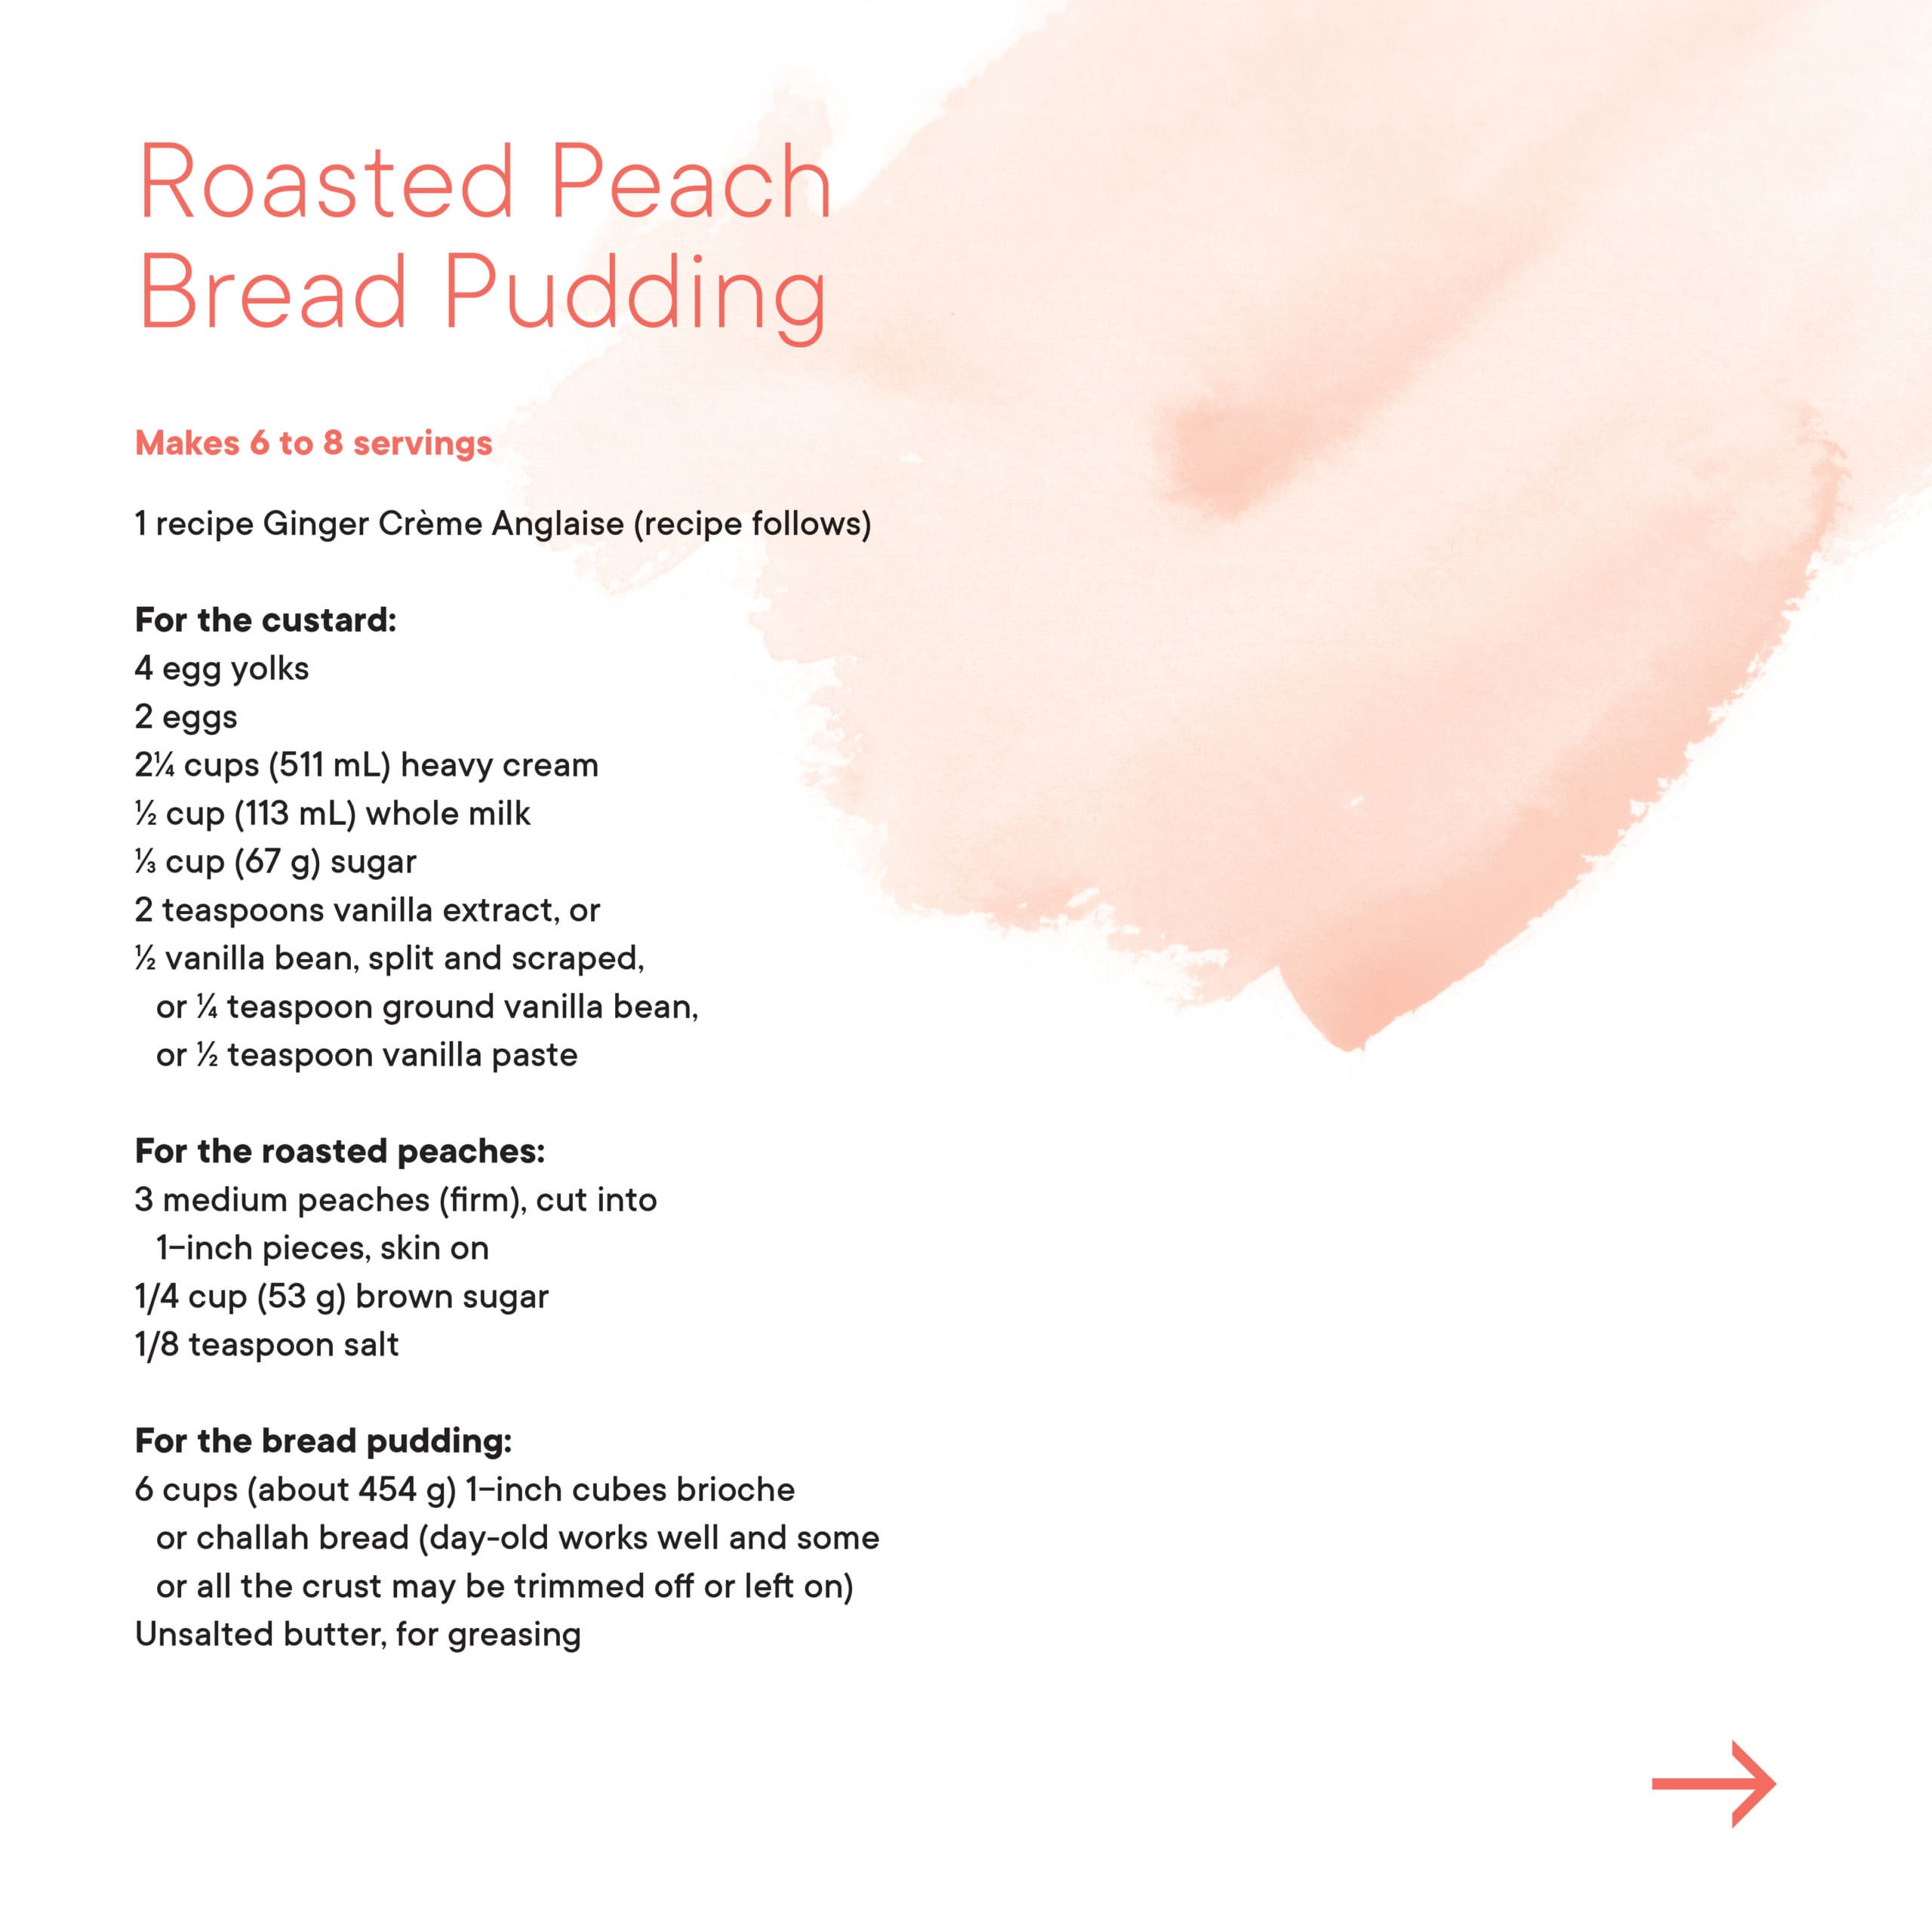 Roasted Peach Bread Pudding recipe ingredients